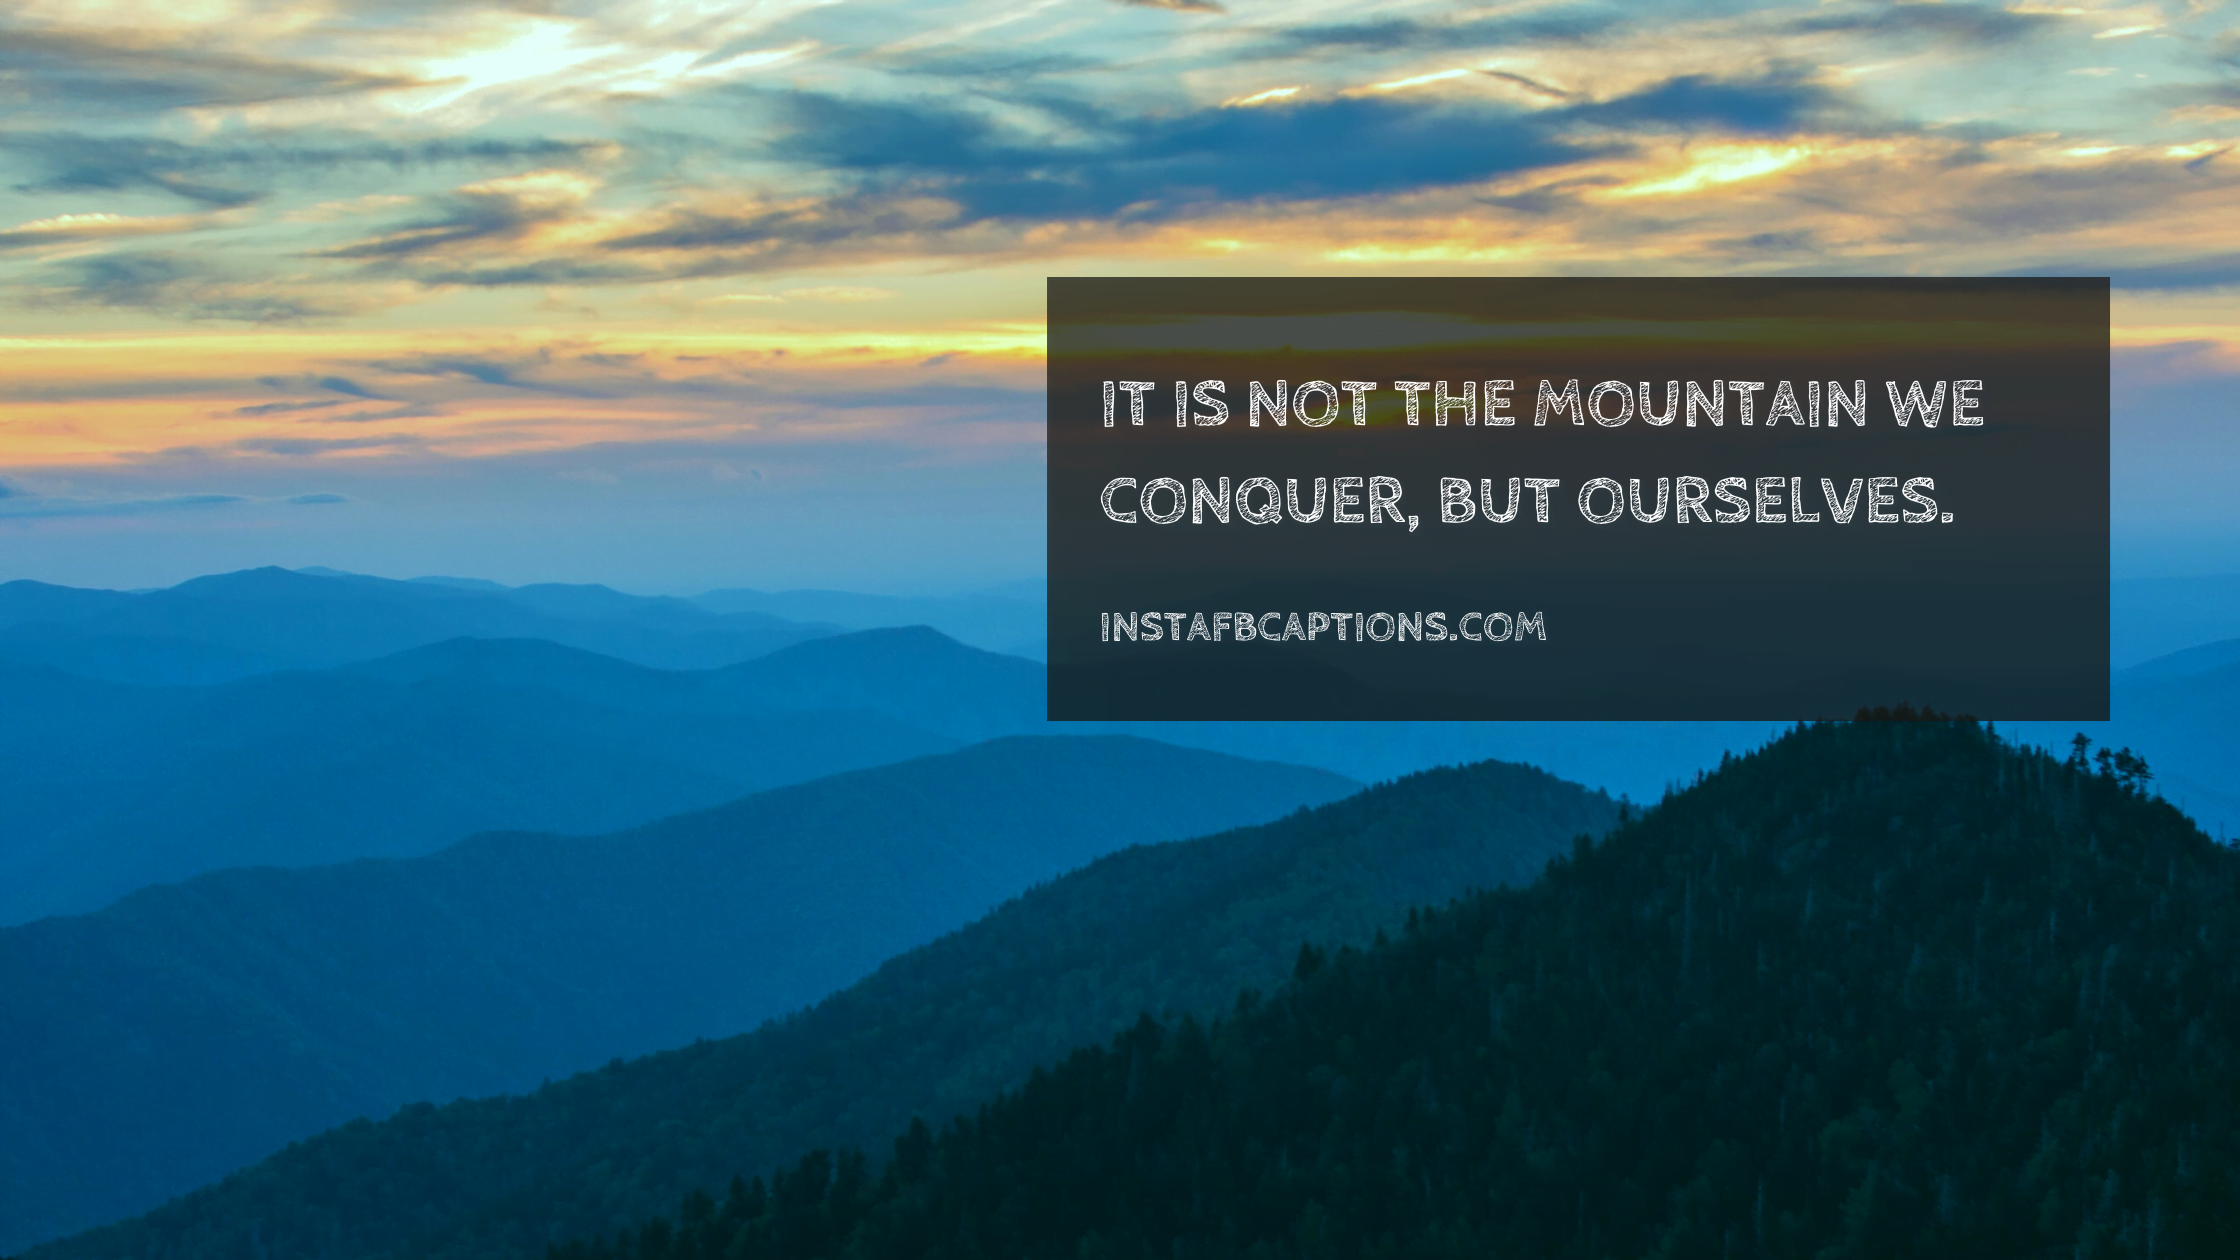 Pinterest Great Smoky Mountains Instagram Captions  - Pinterest Great Smoky Mountains Instagram Captions  - 97 Instagram Captions for Smoky Mountains Pictures in 2023